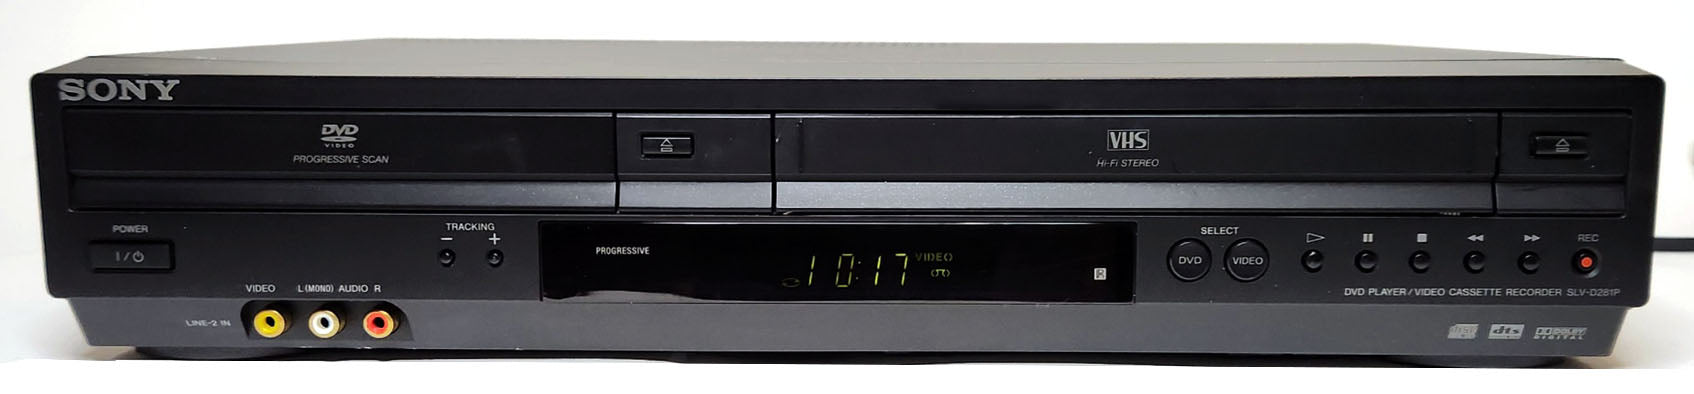 Sony SLV-D281P VCR/DVD Player Combo - Front